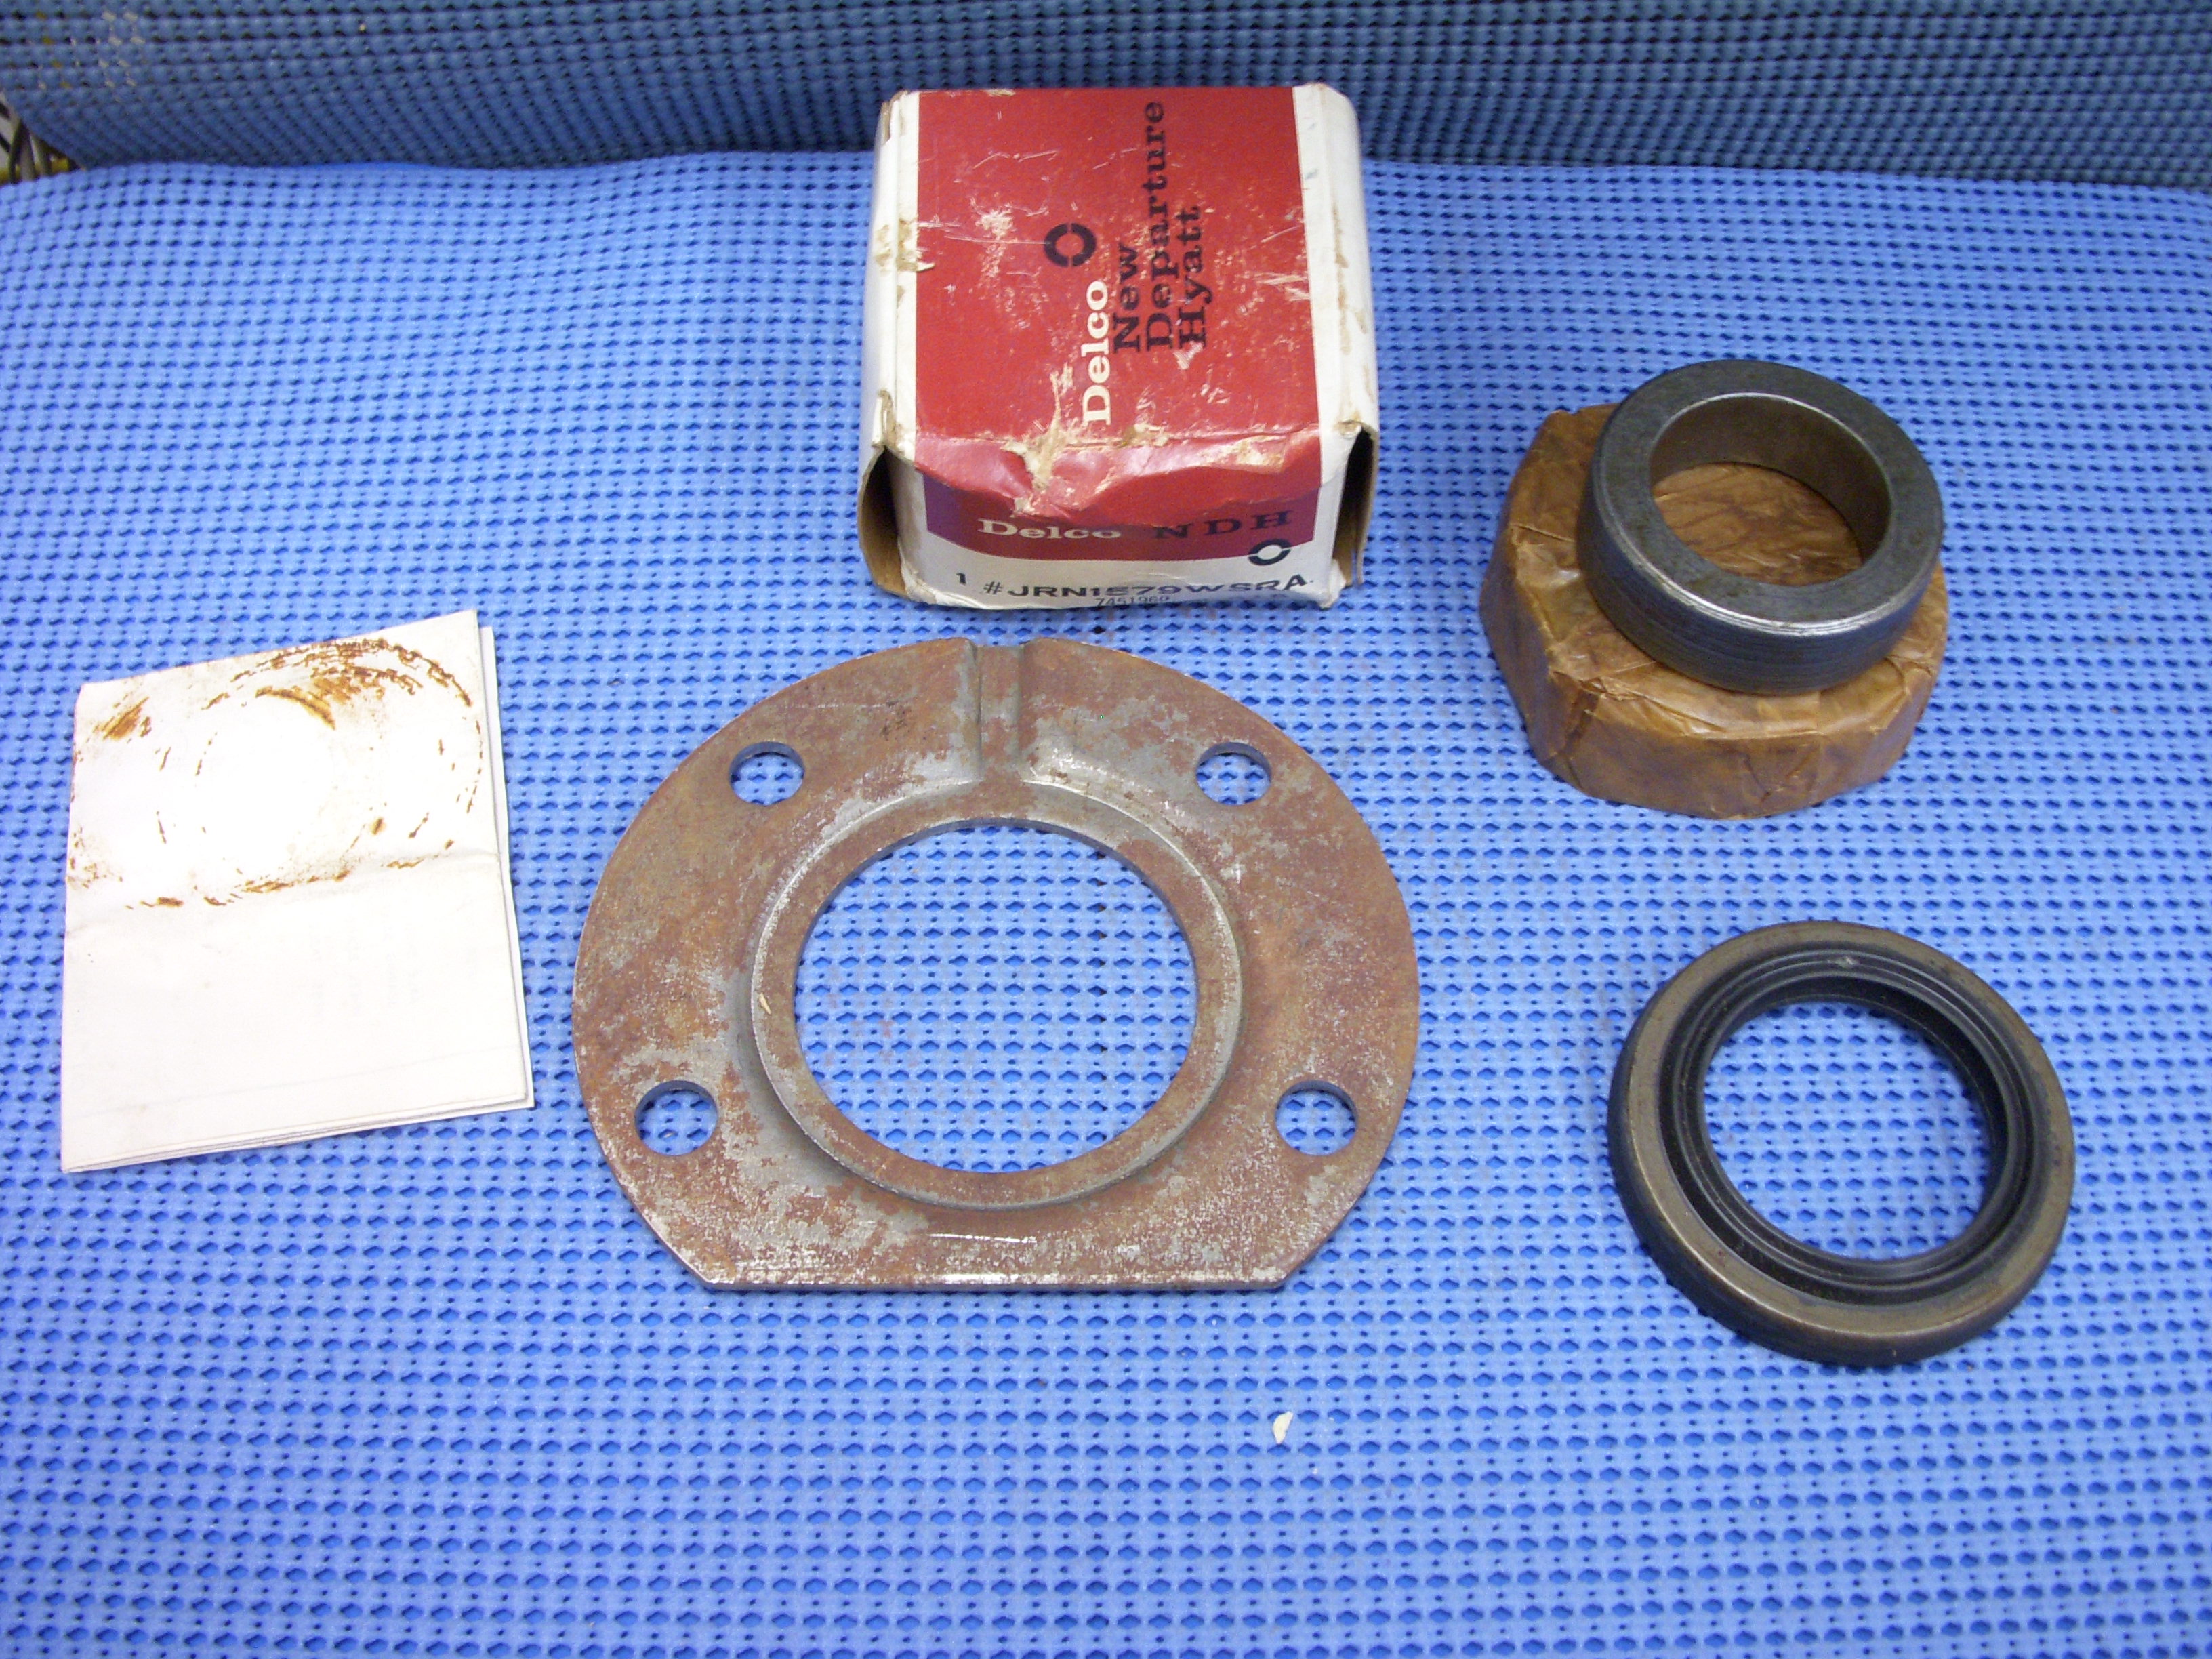 1972 Cadillac Rear Wheel Bearing Kit with Seal and Retainer NOS # 3633846